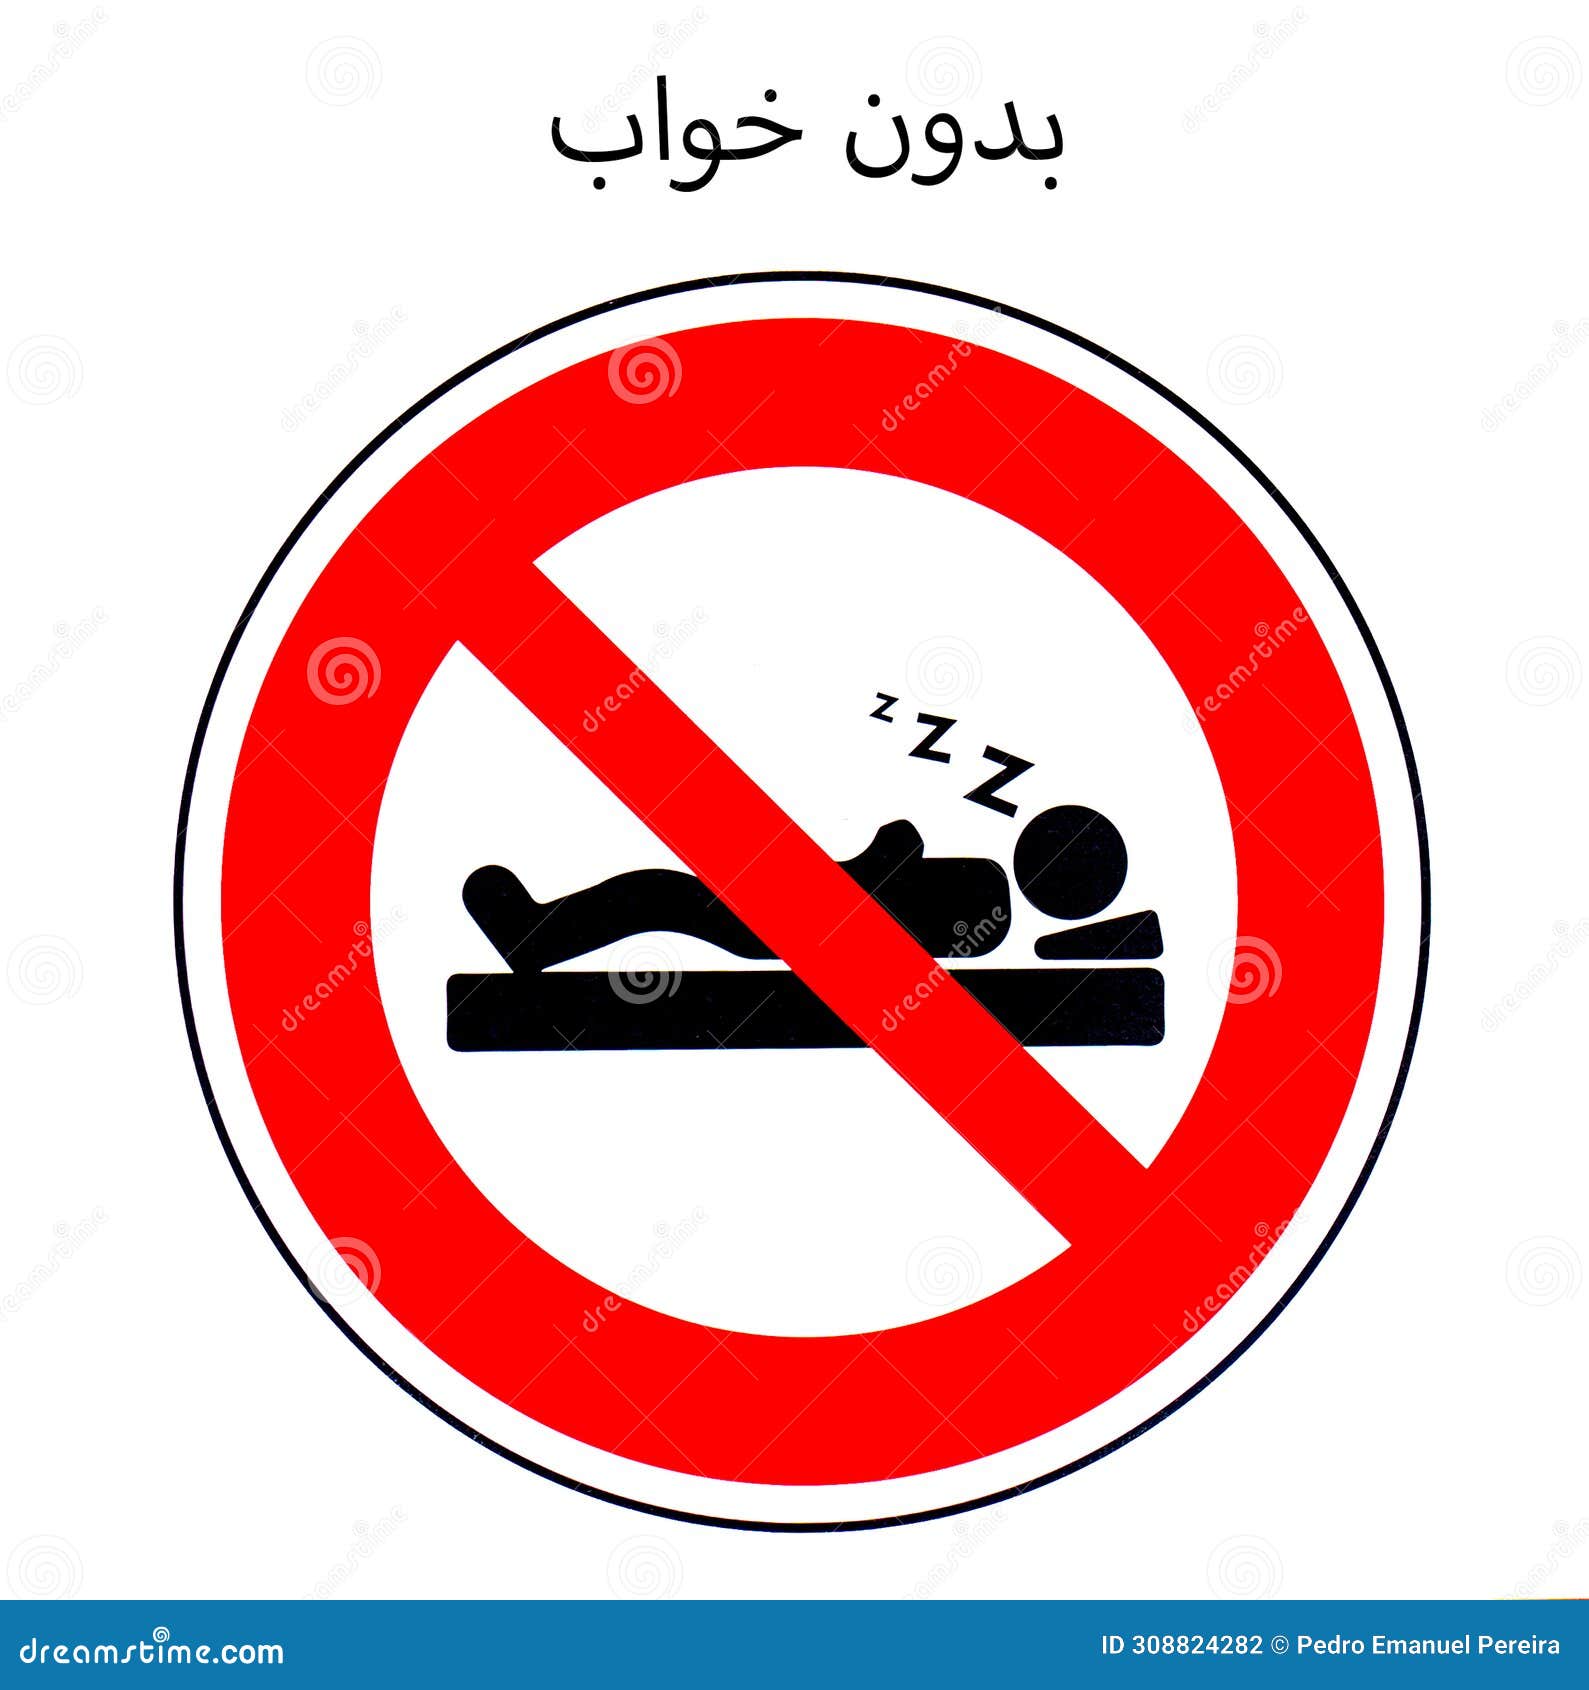 , no sleeping sign written in persa at the top in capital letters